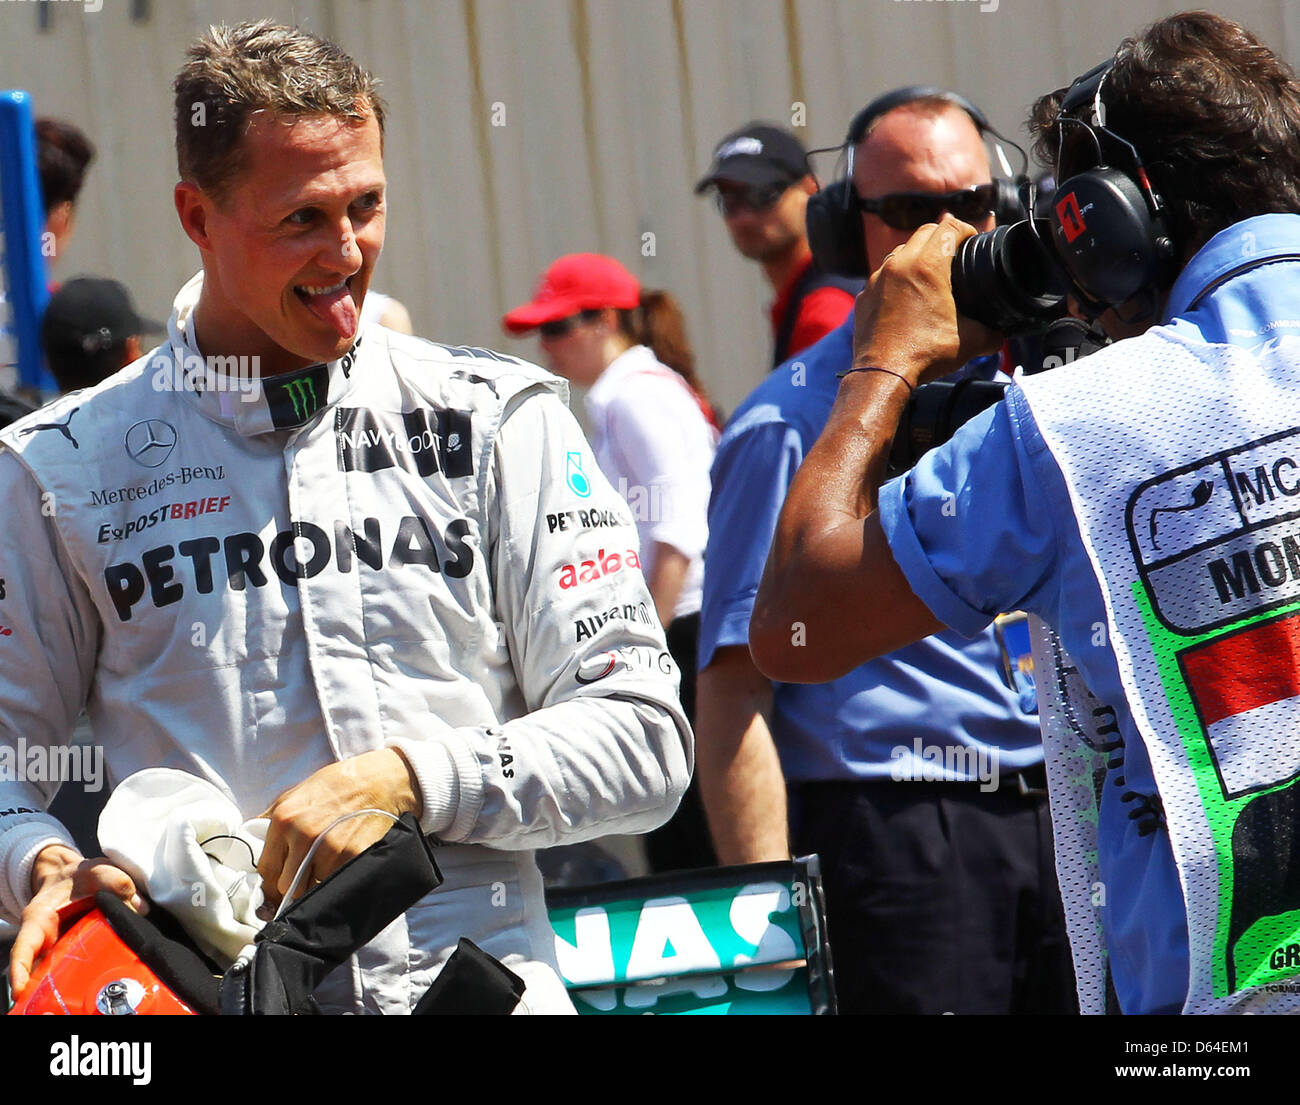 German Formula One driver Michael Schumacher of Mercedes AMG reacts after he clocked the fastest time in the Qualifying session at the F1 race track of Monte Carlo, Monaco, 26 May 2012. The Grand Prix will take place on 27 May. Photo: Jens Buettner dpa (ACHTUNG: Wiederholung mit verändertem Bildausschnitt)  +++(c) dpa - Bildfunk+++ Stock Photo